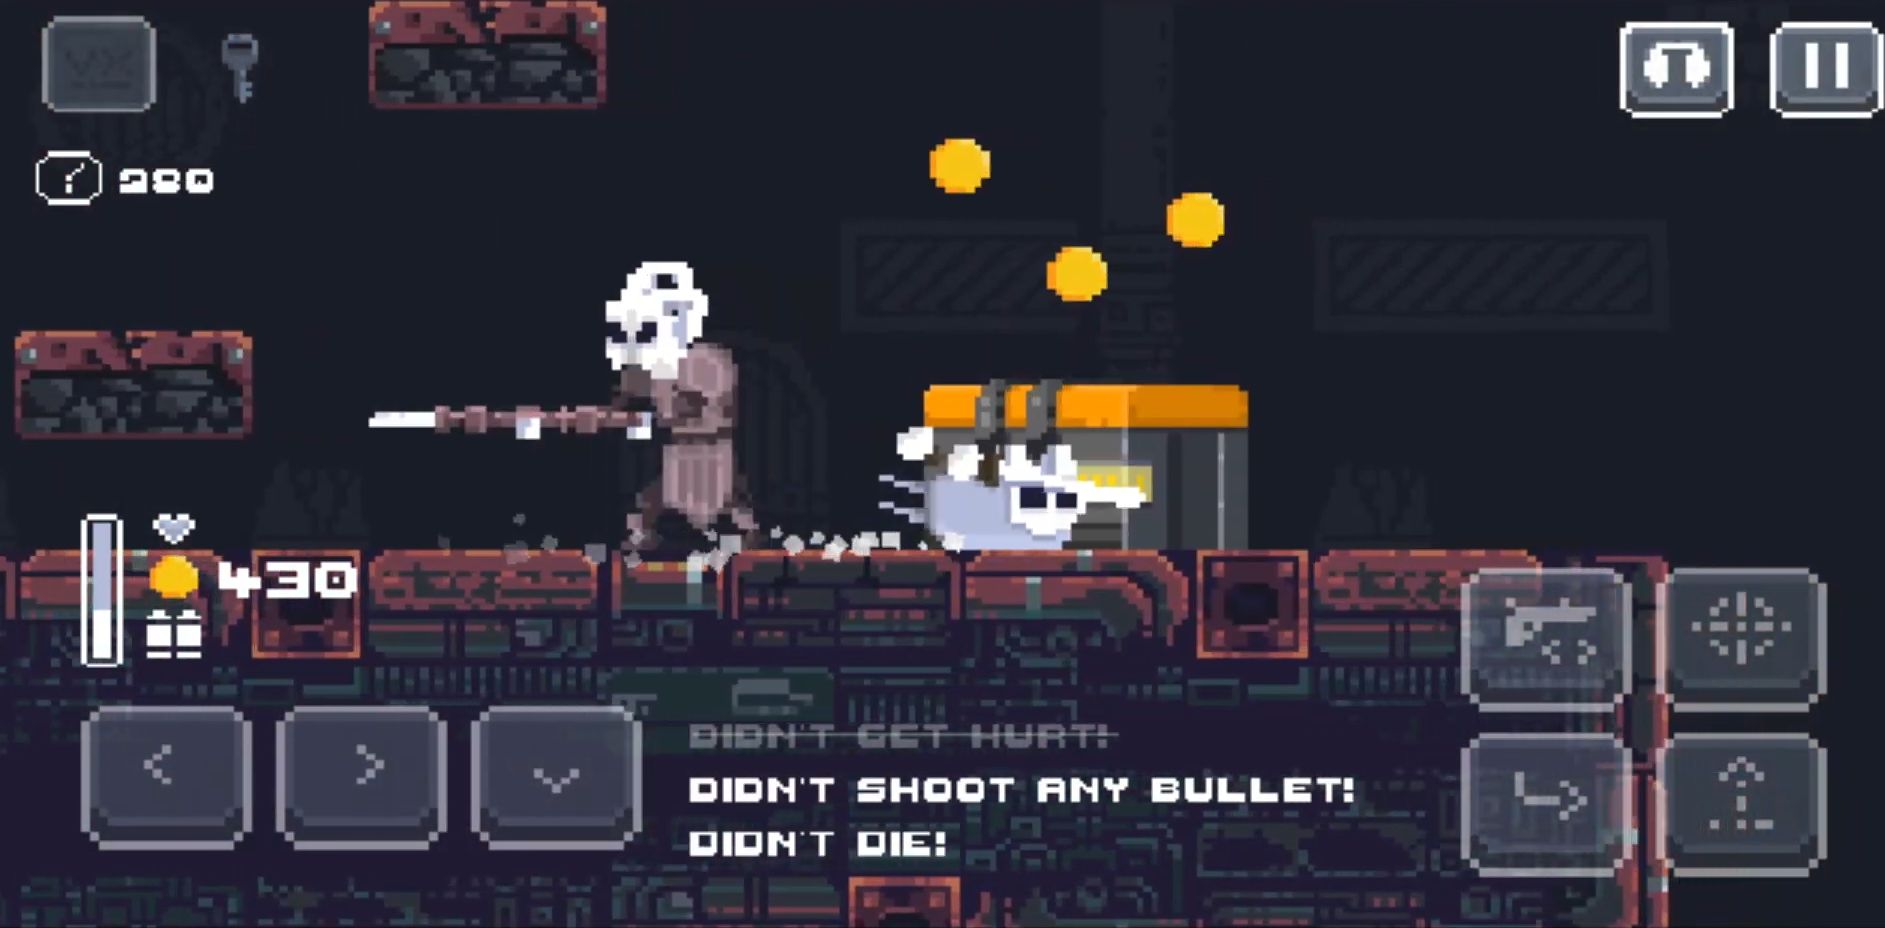 Drish - The Challenge: Rabbit Action Adventure for Android